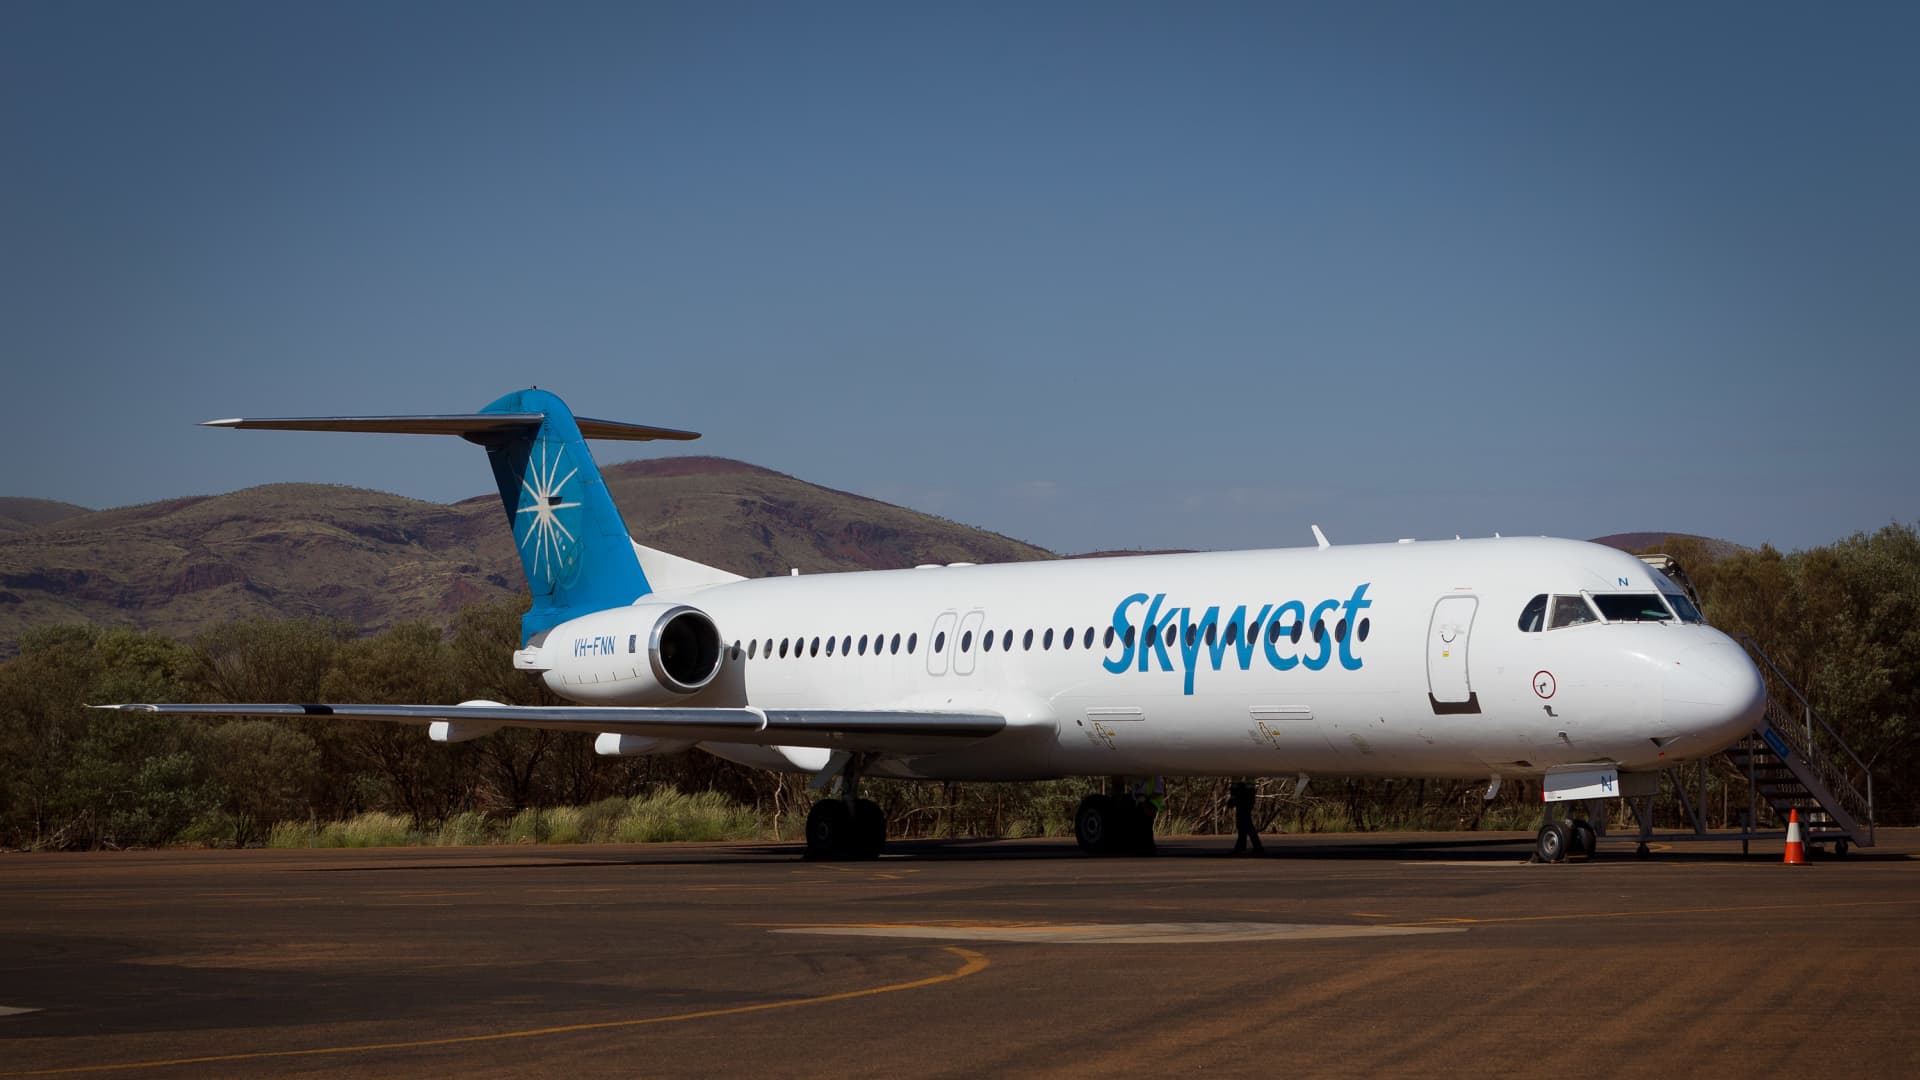 SkyWest ranked as the second best U.S. airline, according to WalletHub.